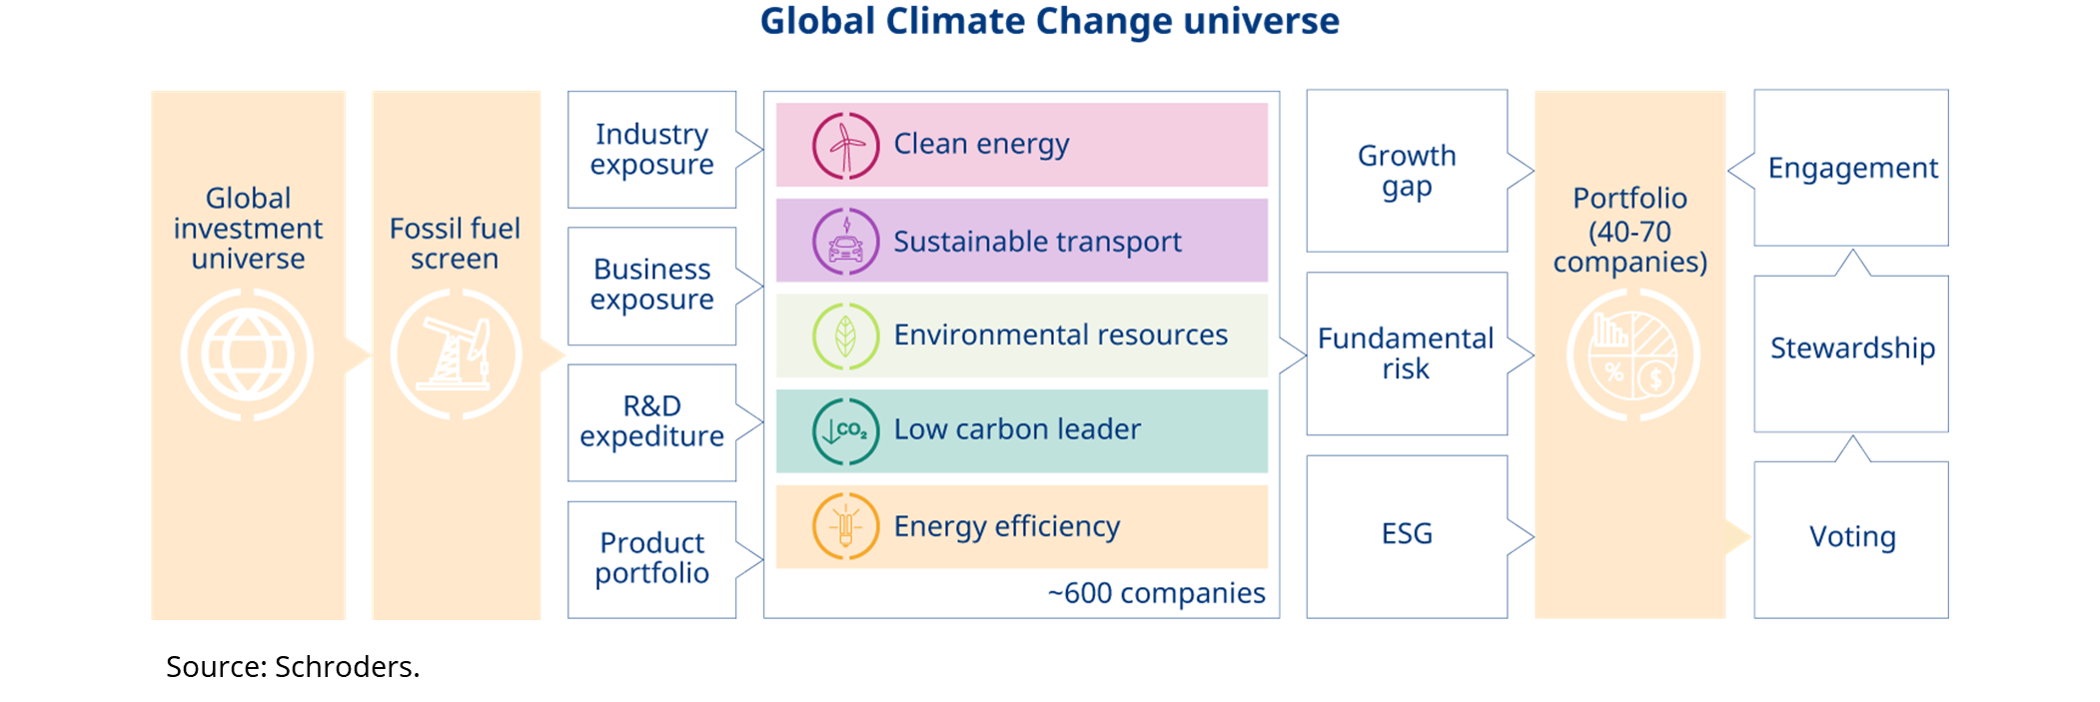 Global Climate Change universe